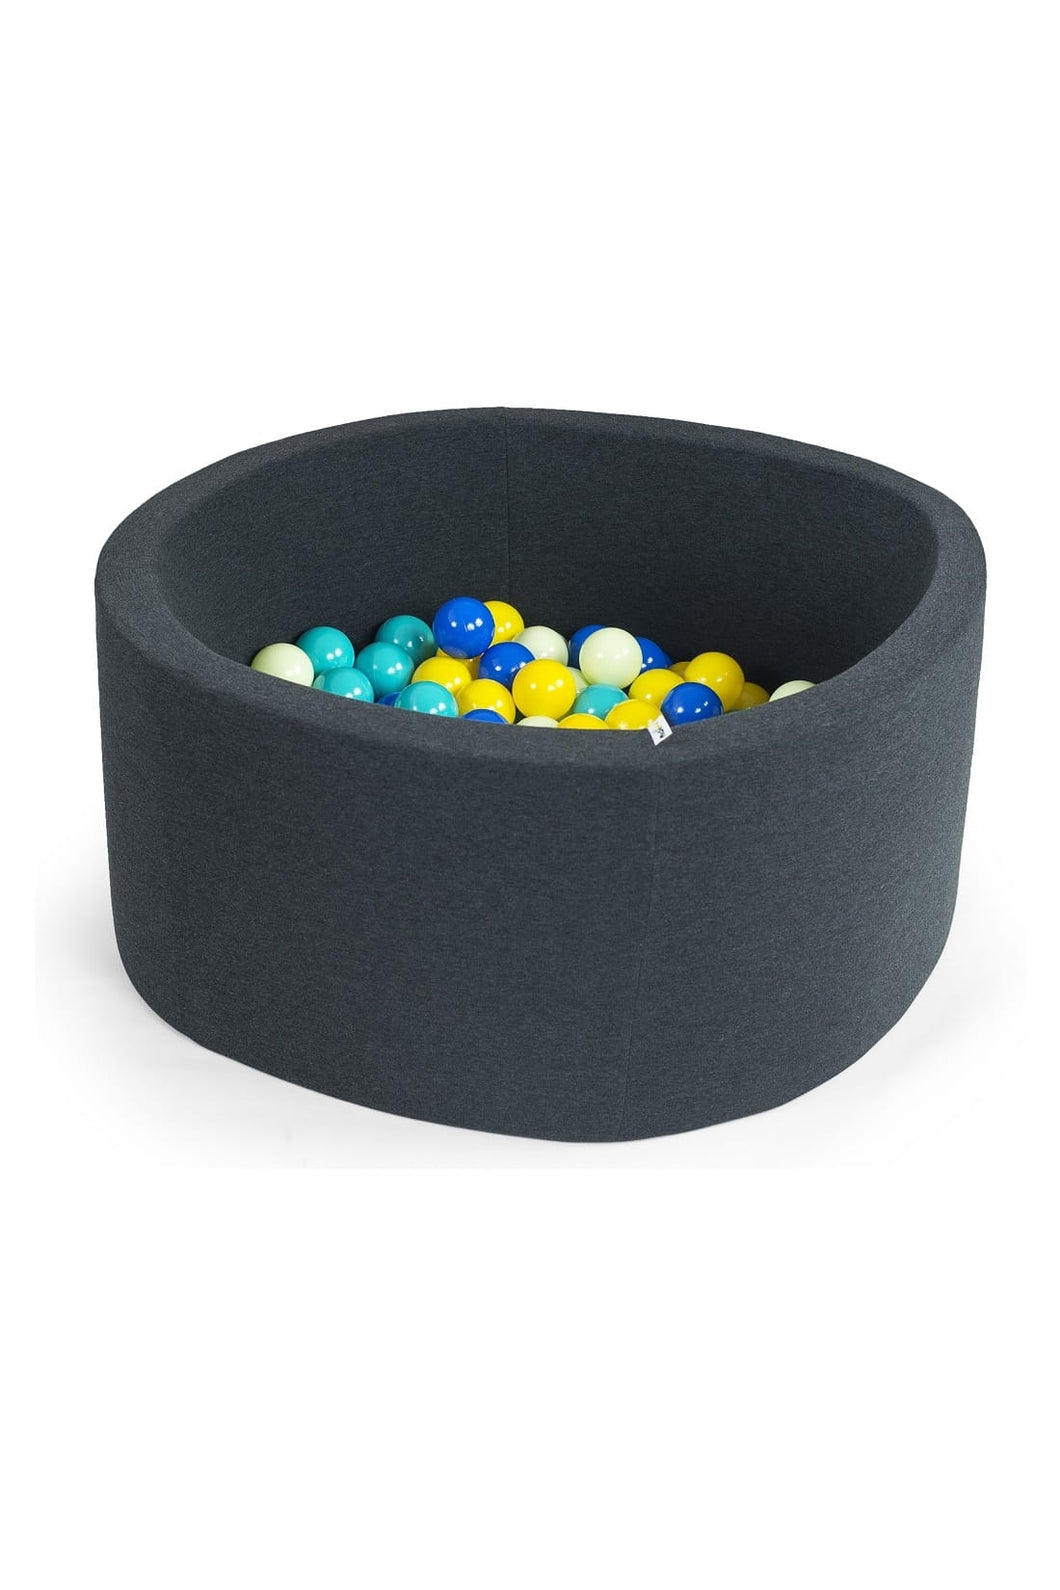 Misioo Ball Pits Round Graphite Small 90 X 30 1